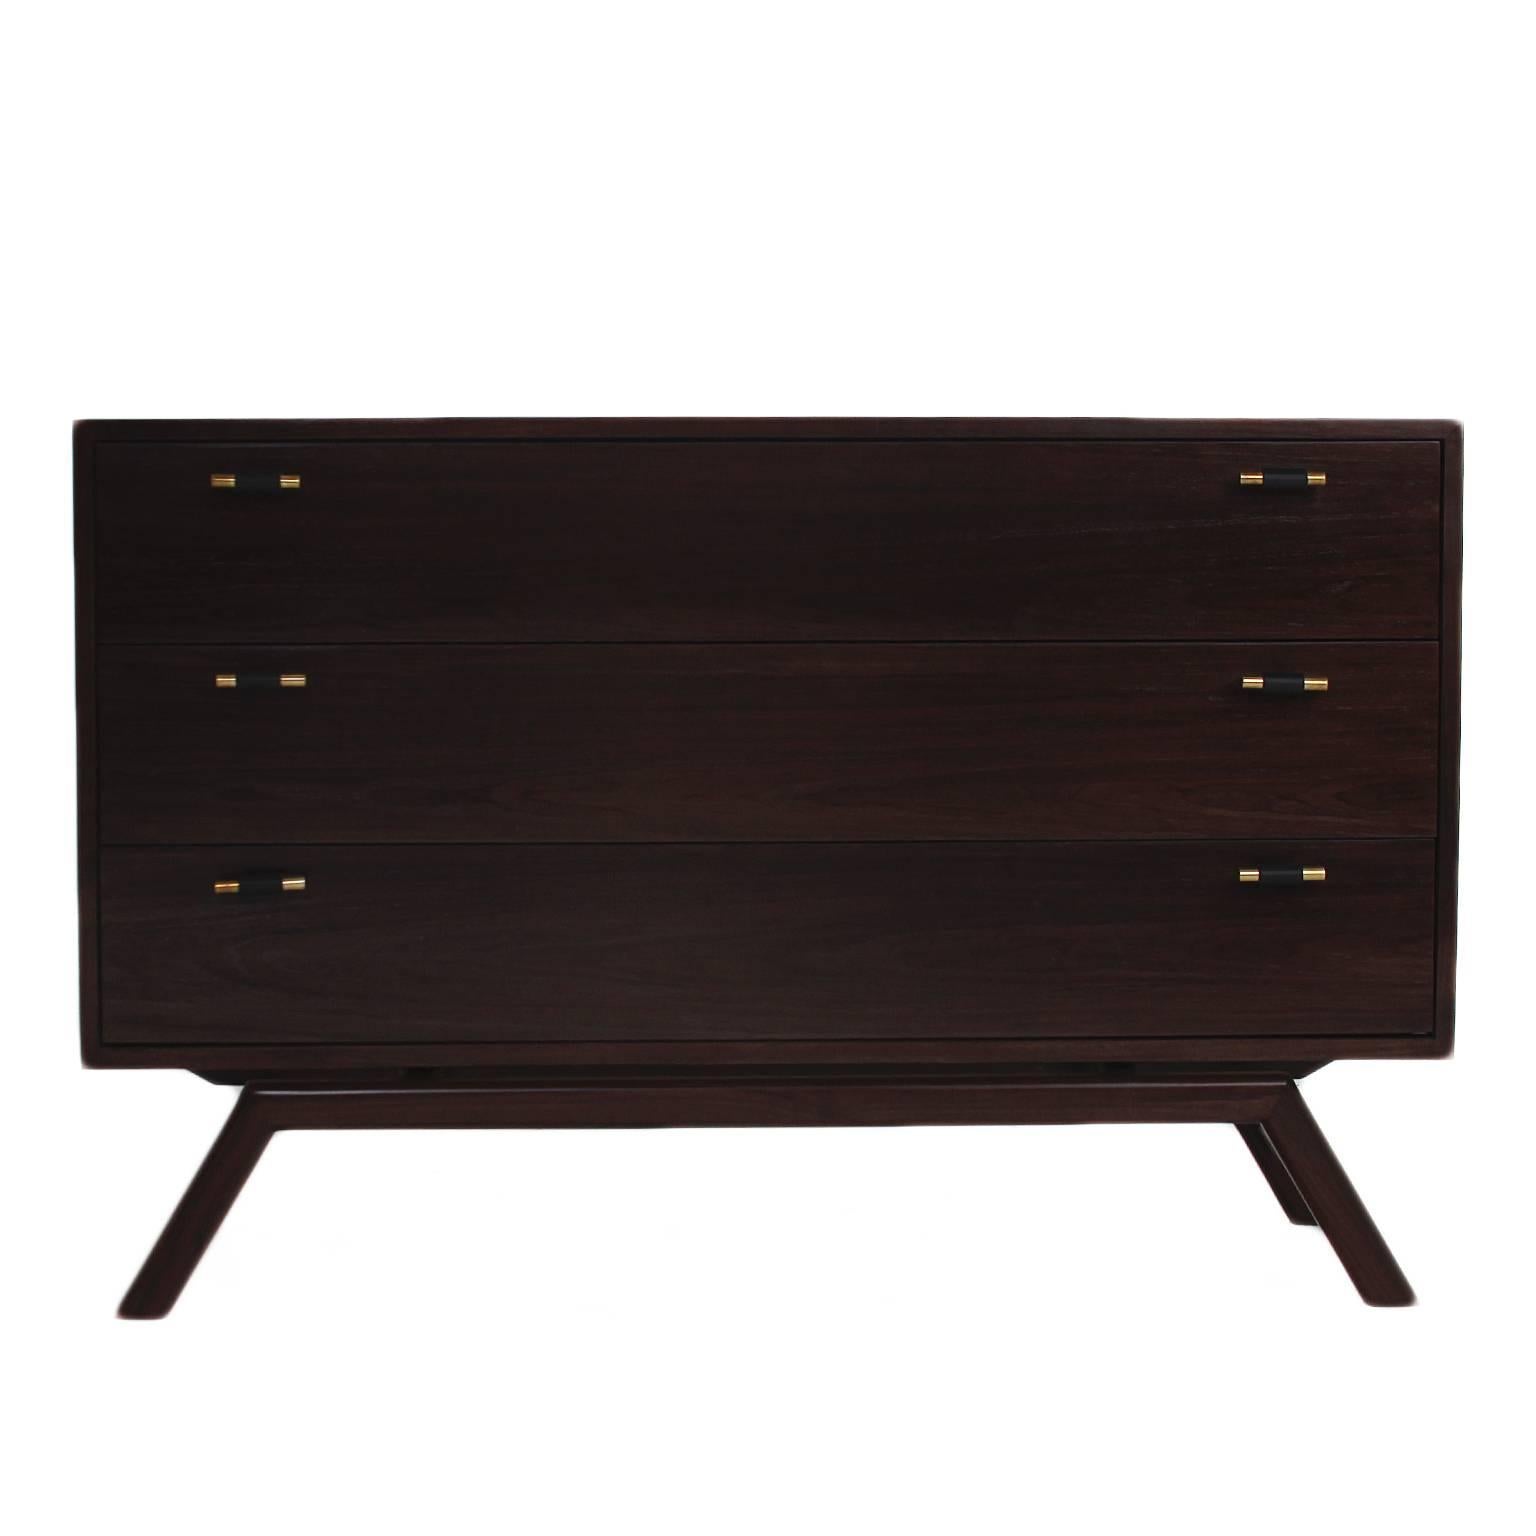 A beautiful dresser made of Walnut veneer with a sculptural base made of solid walnut. There are 3 drawers with leather wrapped Brass pulls.

This particular cabinet is made of solid walnut with a dark walnut satin lacquer finish.

The price is